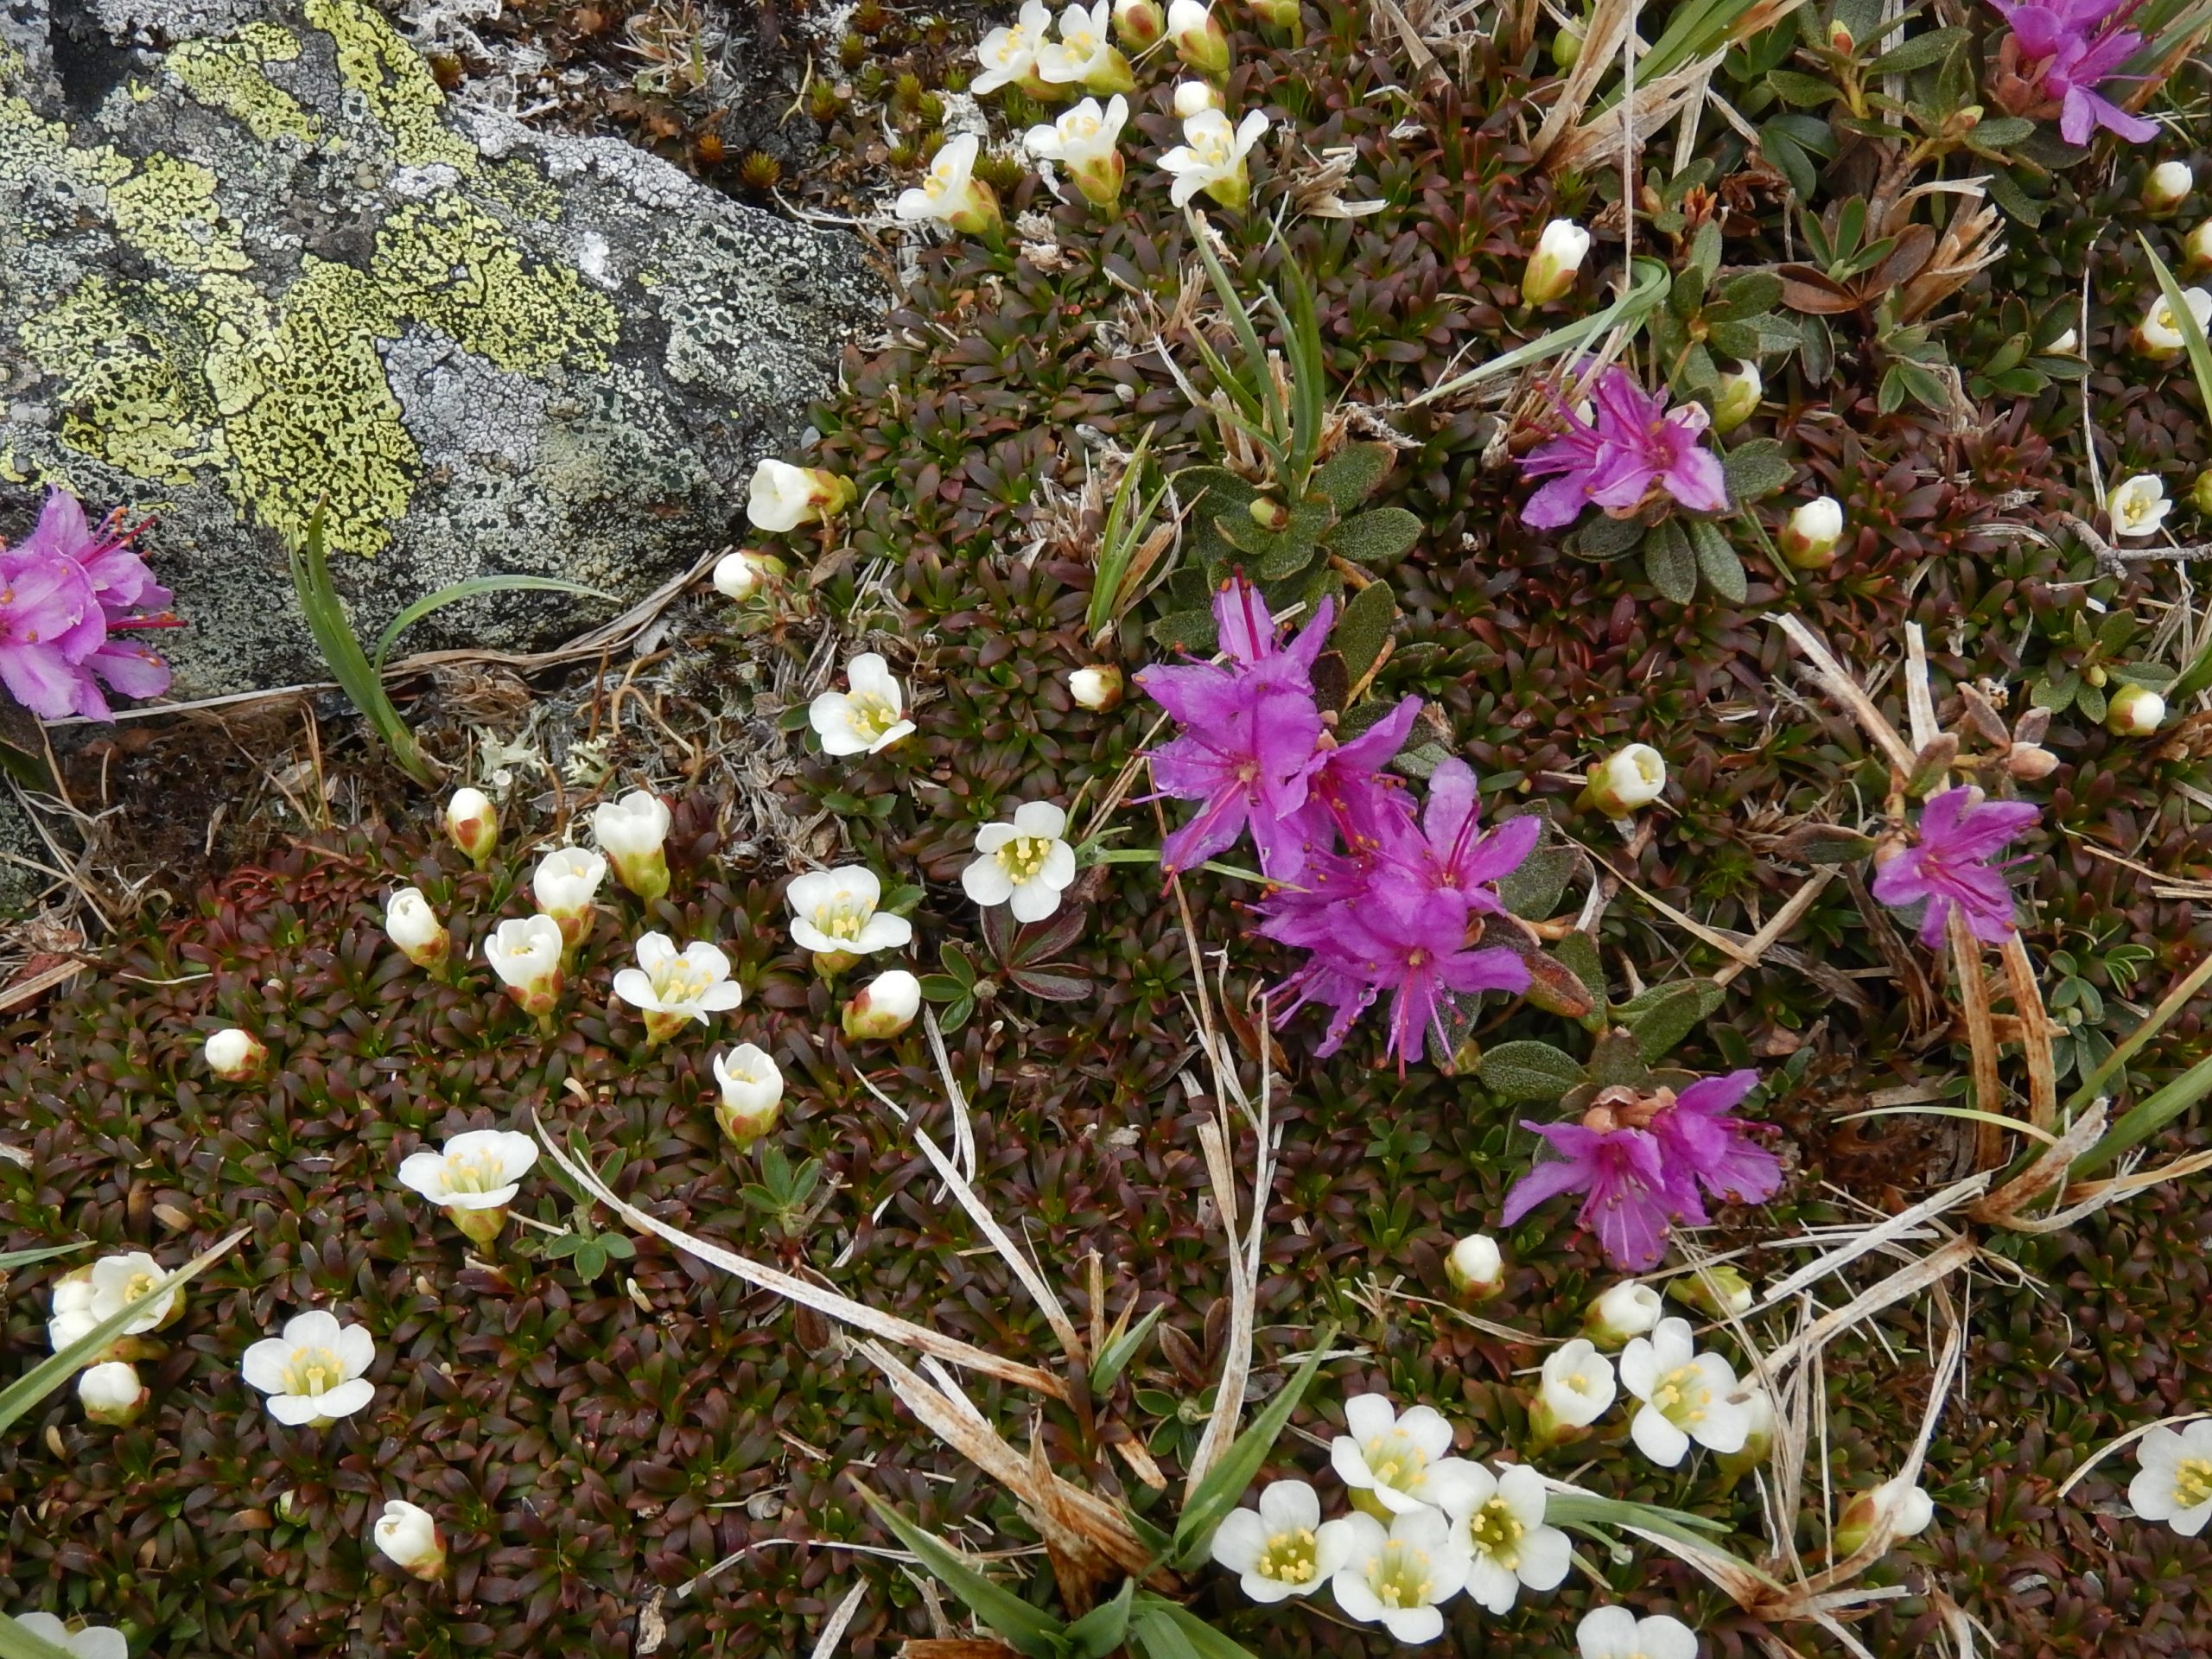 Image of Diapensia lapponica and Rhododendron lapponicum.